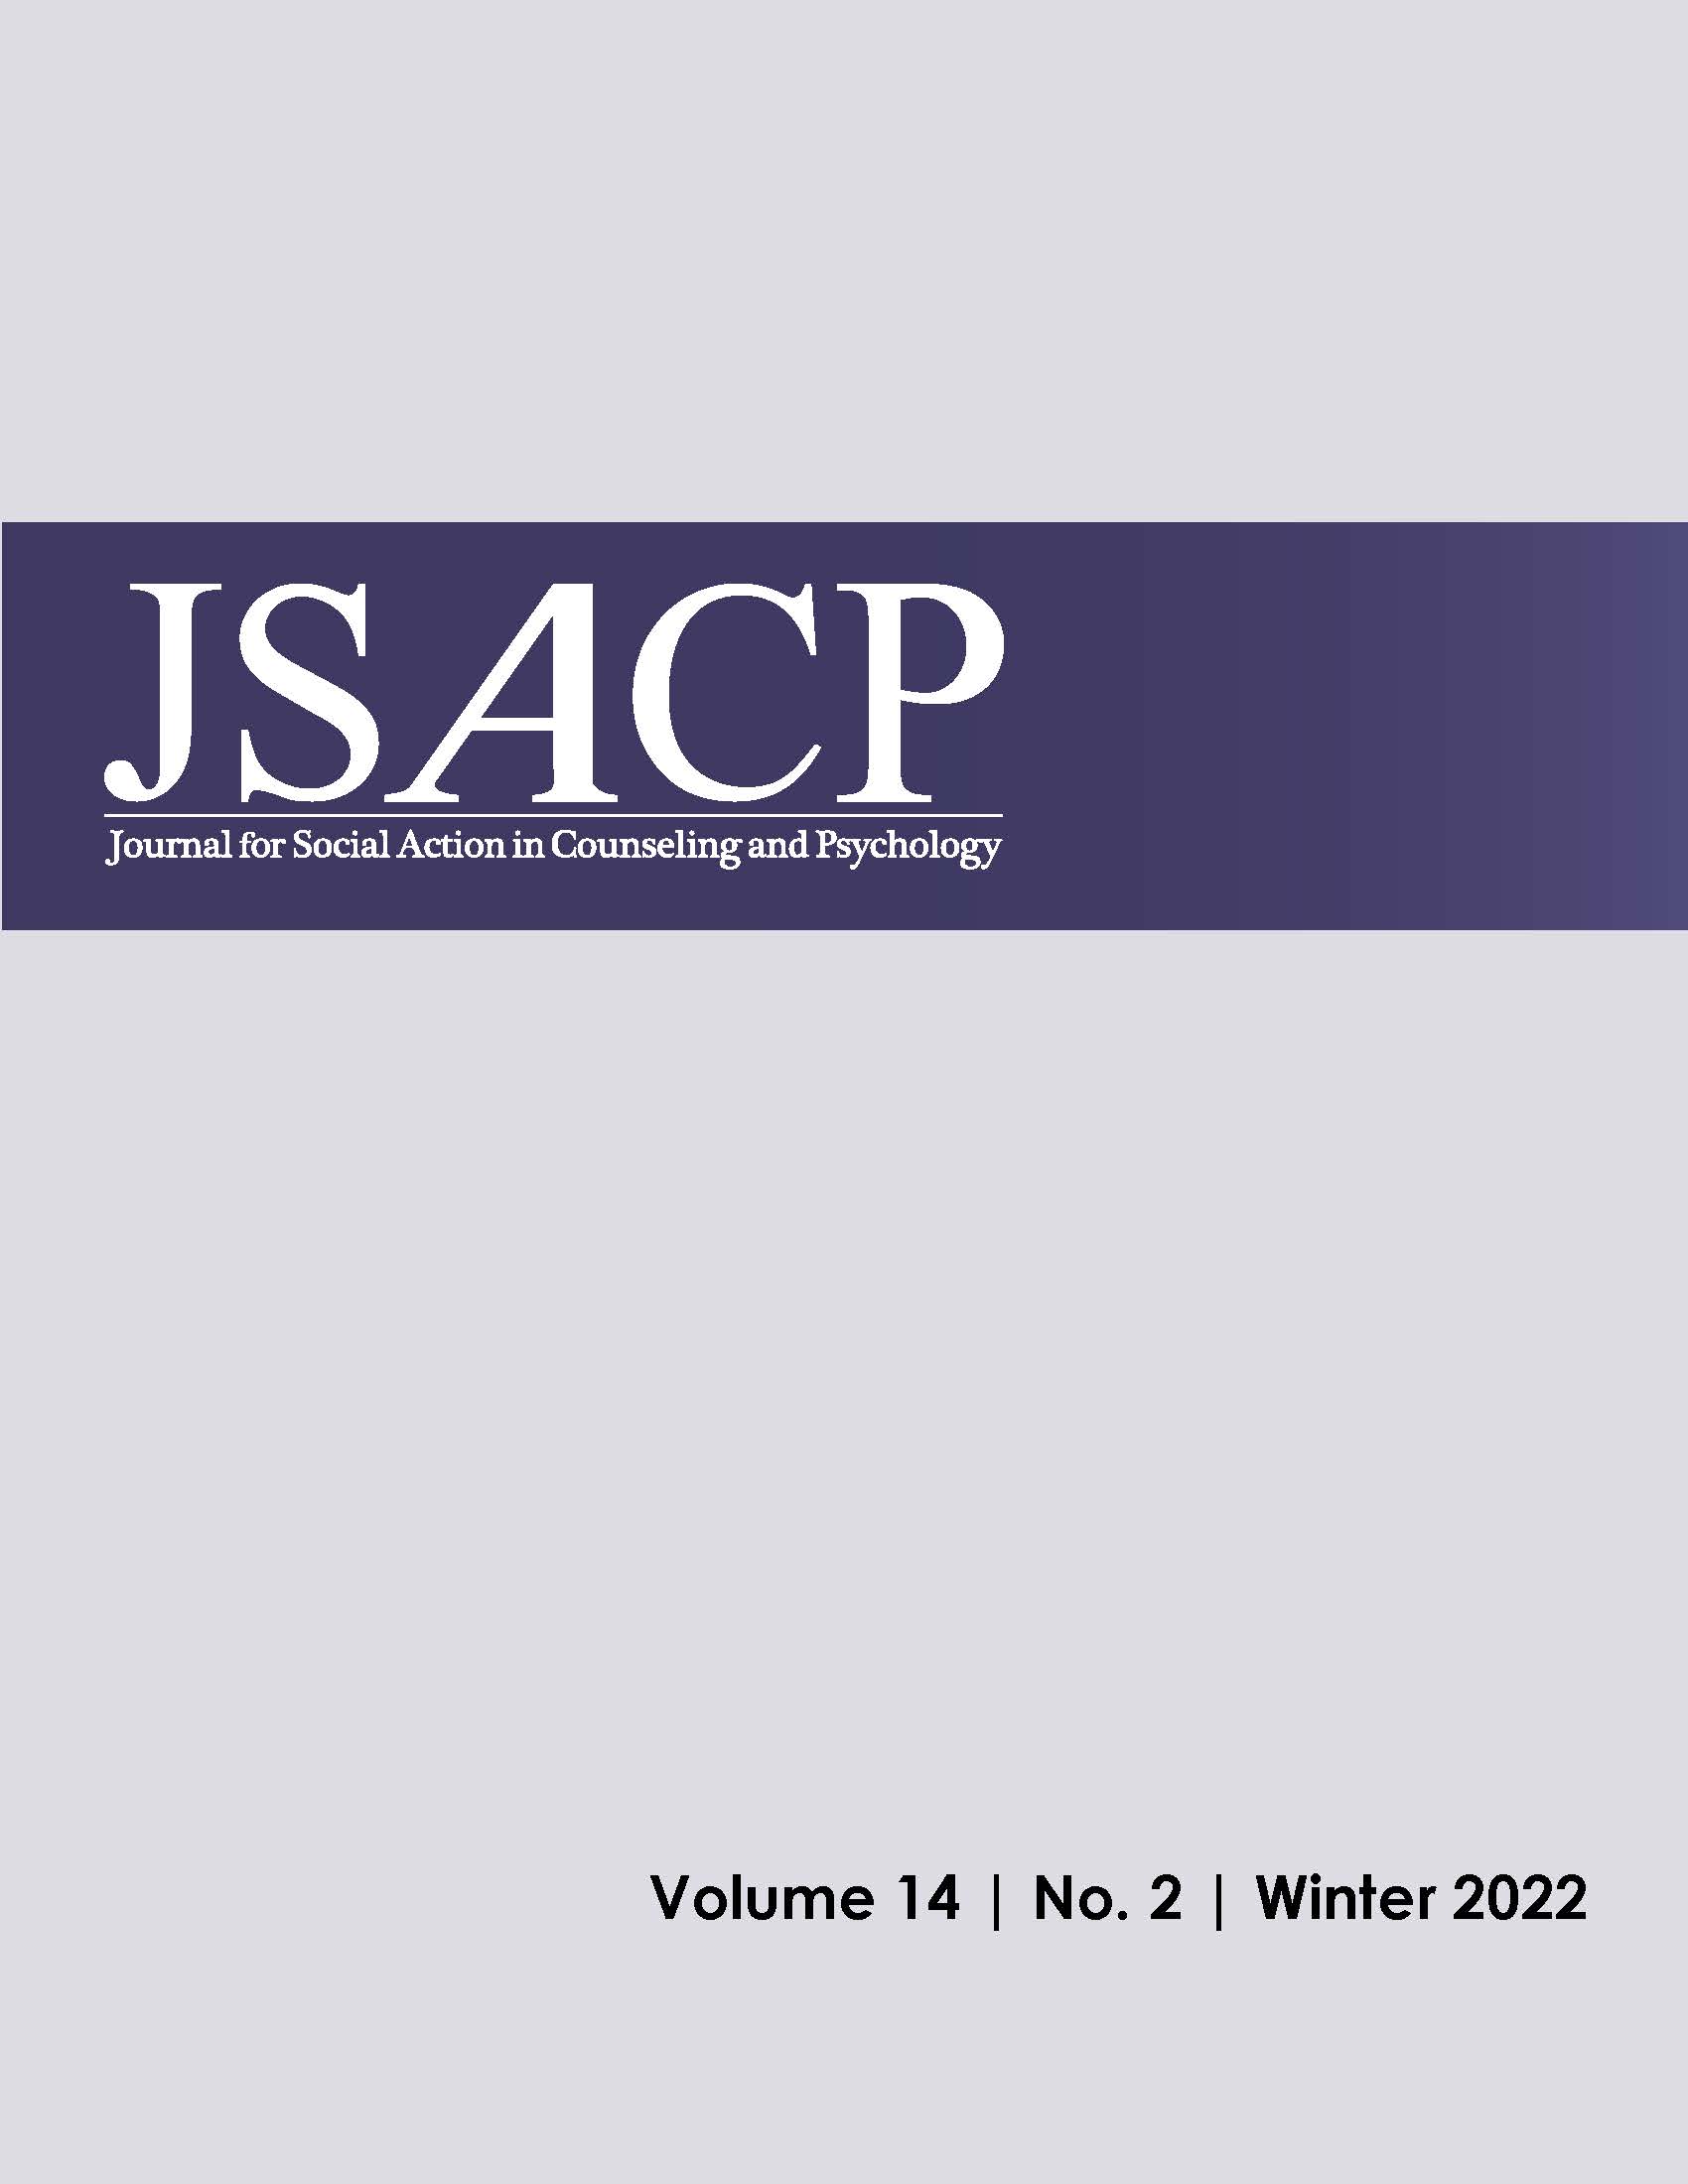 					View Vol. 14 No. 2 (2022): Journal for Social Action in Counseling and Psychology - Special Issue: Curriculum & Training pt. 2, Winter 2022
				